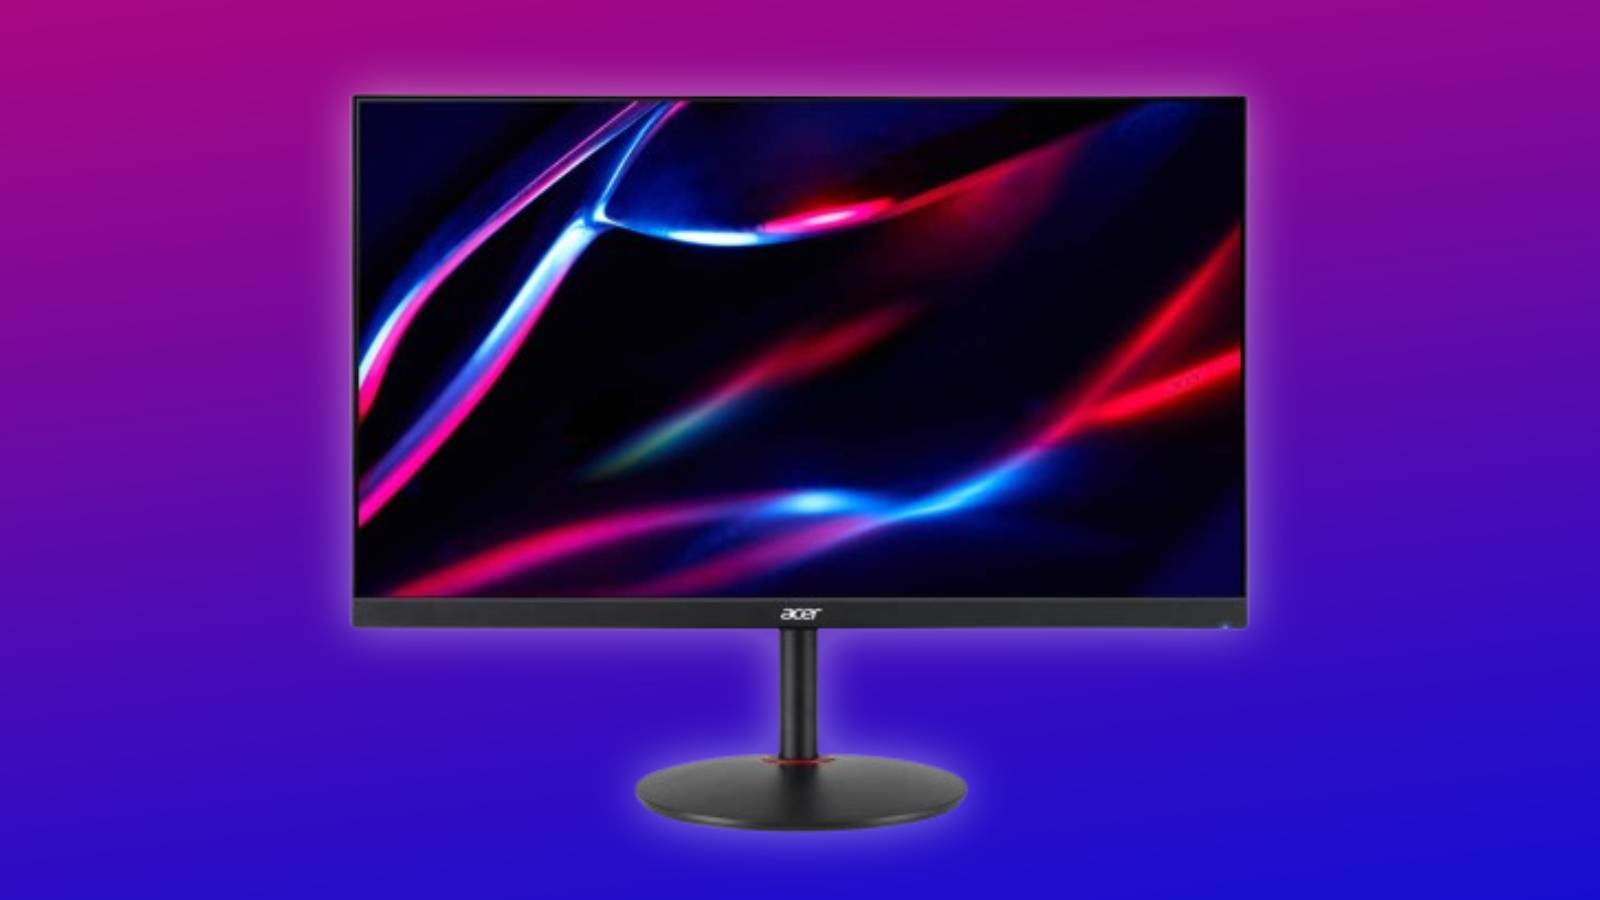 Image of the Acer Nitro 27" WQHD 2560 x 1440 PC Gaming IPS Monitor on a blue and pink background.